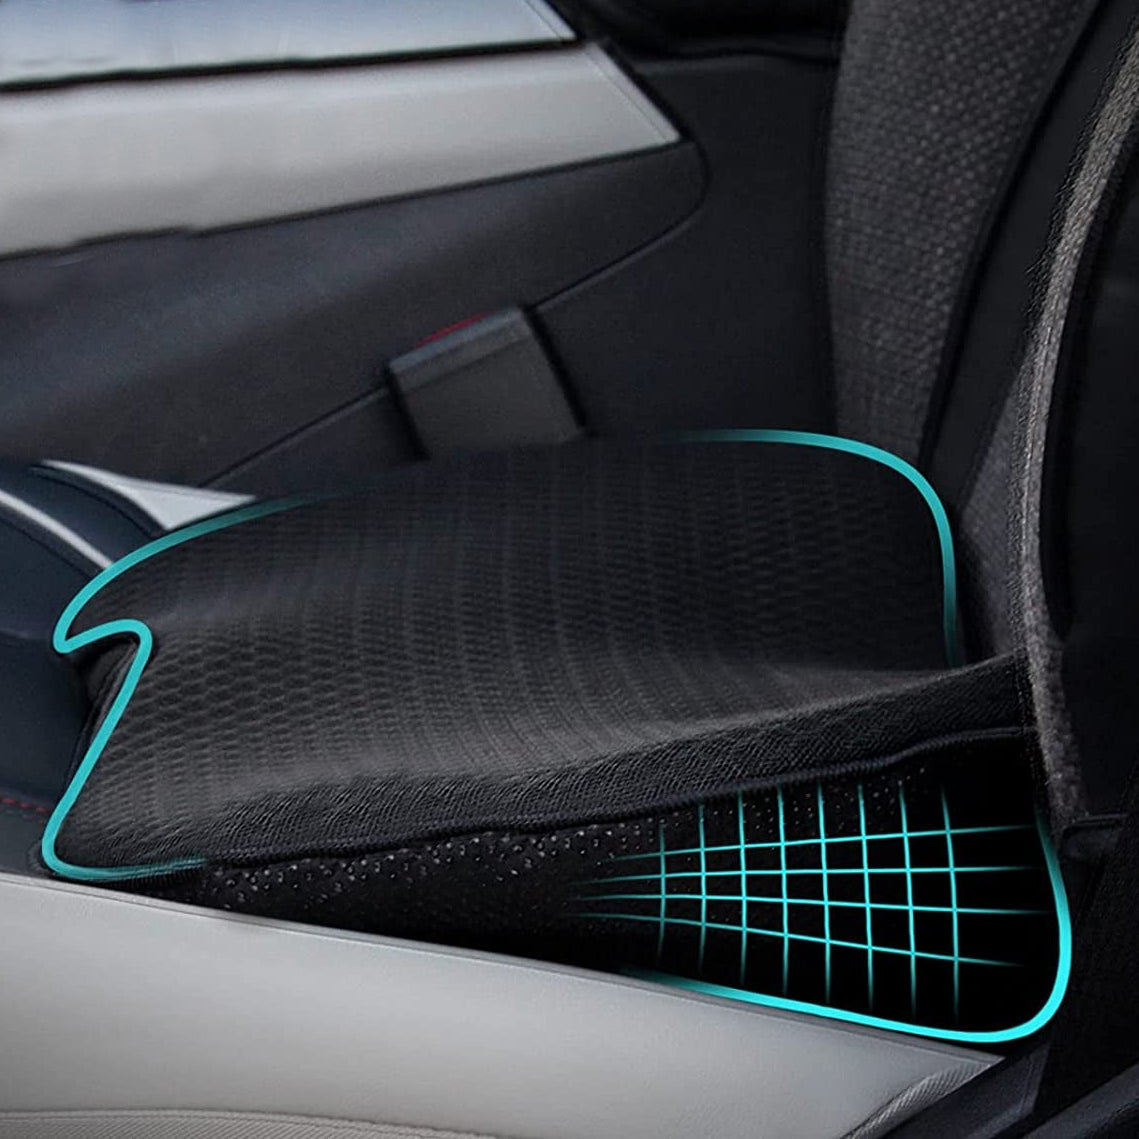 1 pcs Seat Cushion For Car Seat Driver，Car Seat Cushions For Short People